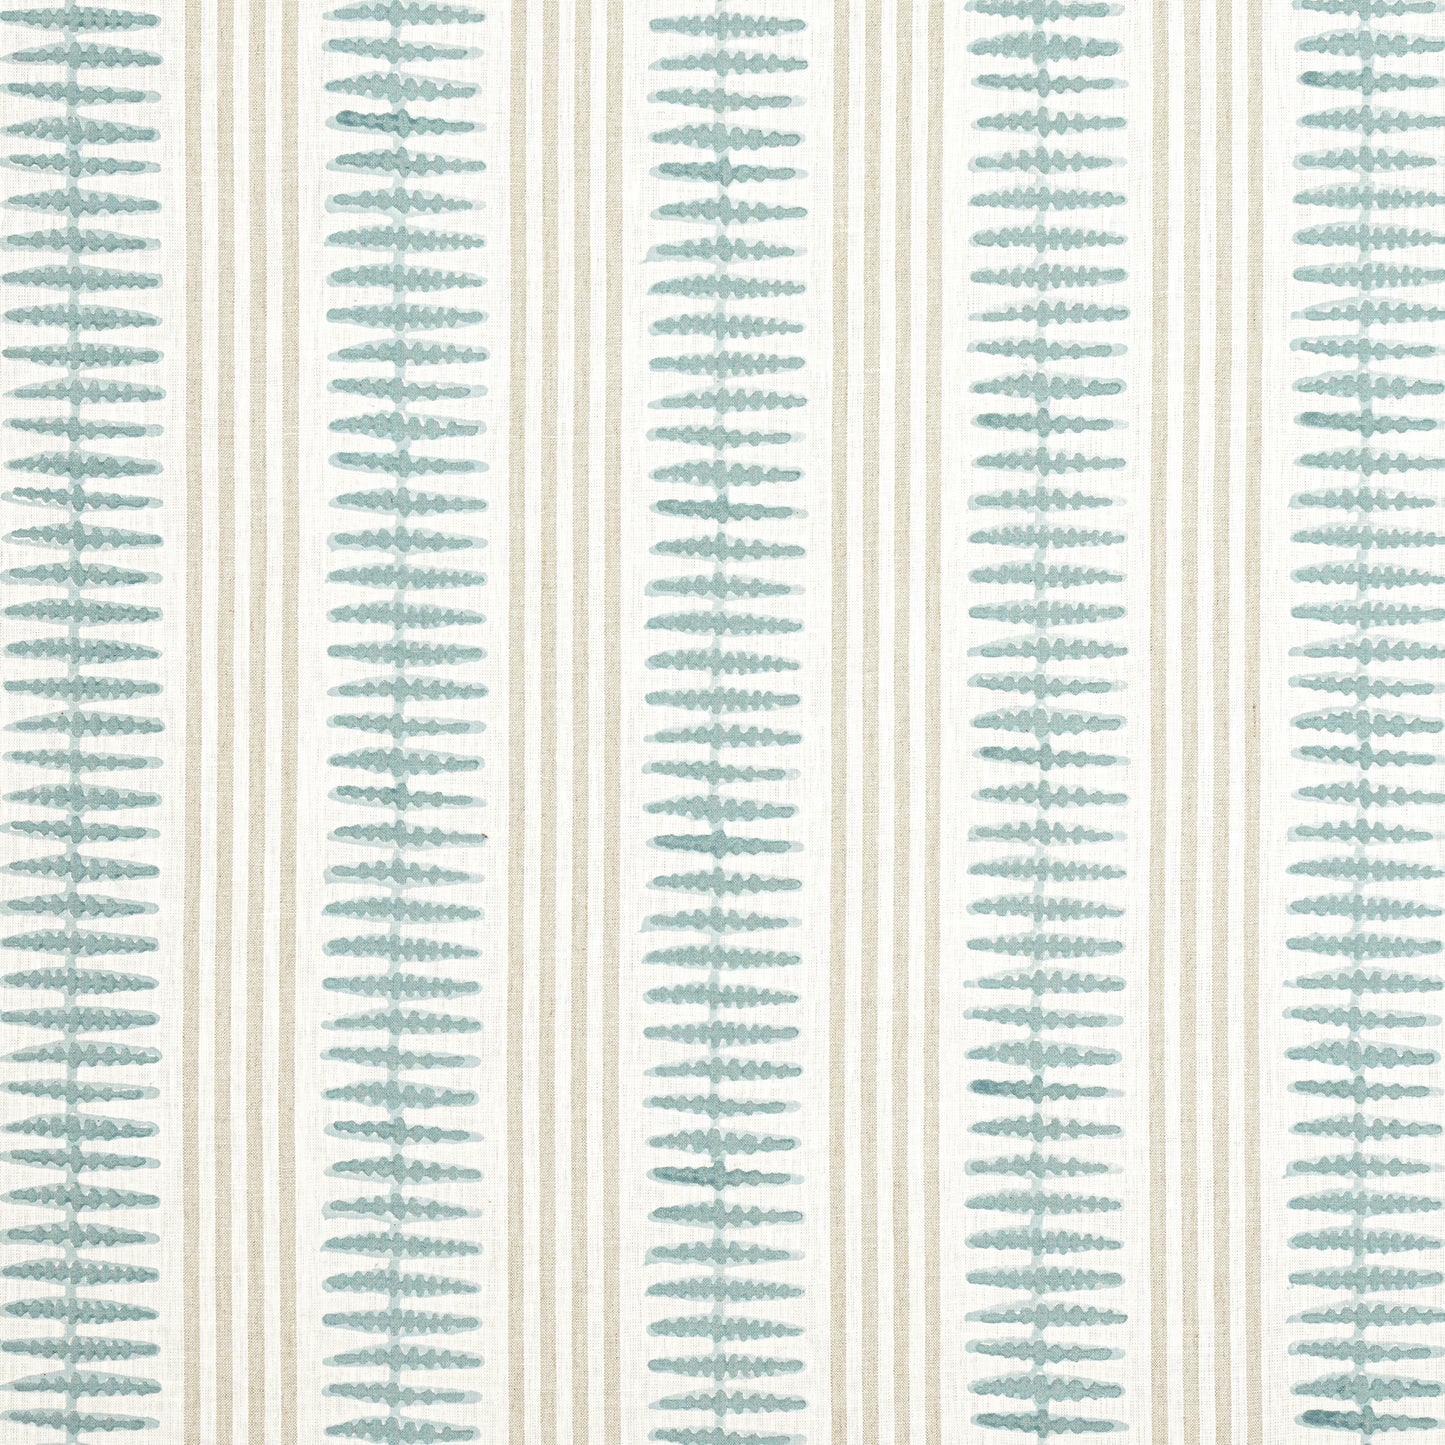 Purchase Thibaut Fabric Item# F981315 pattern name Indo Stripe color Seaglass